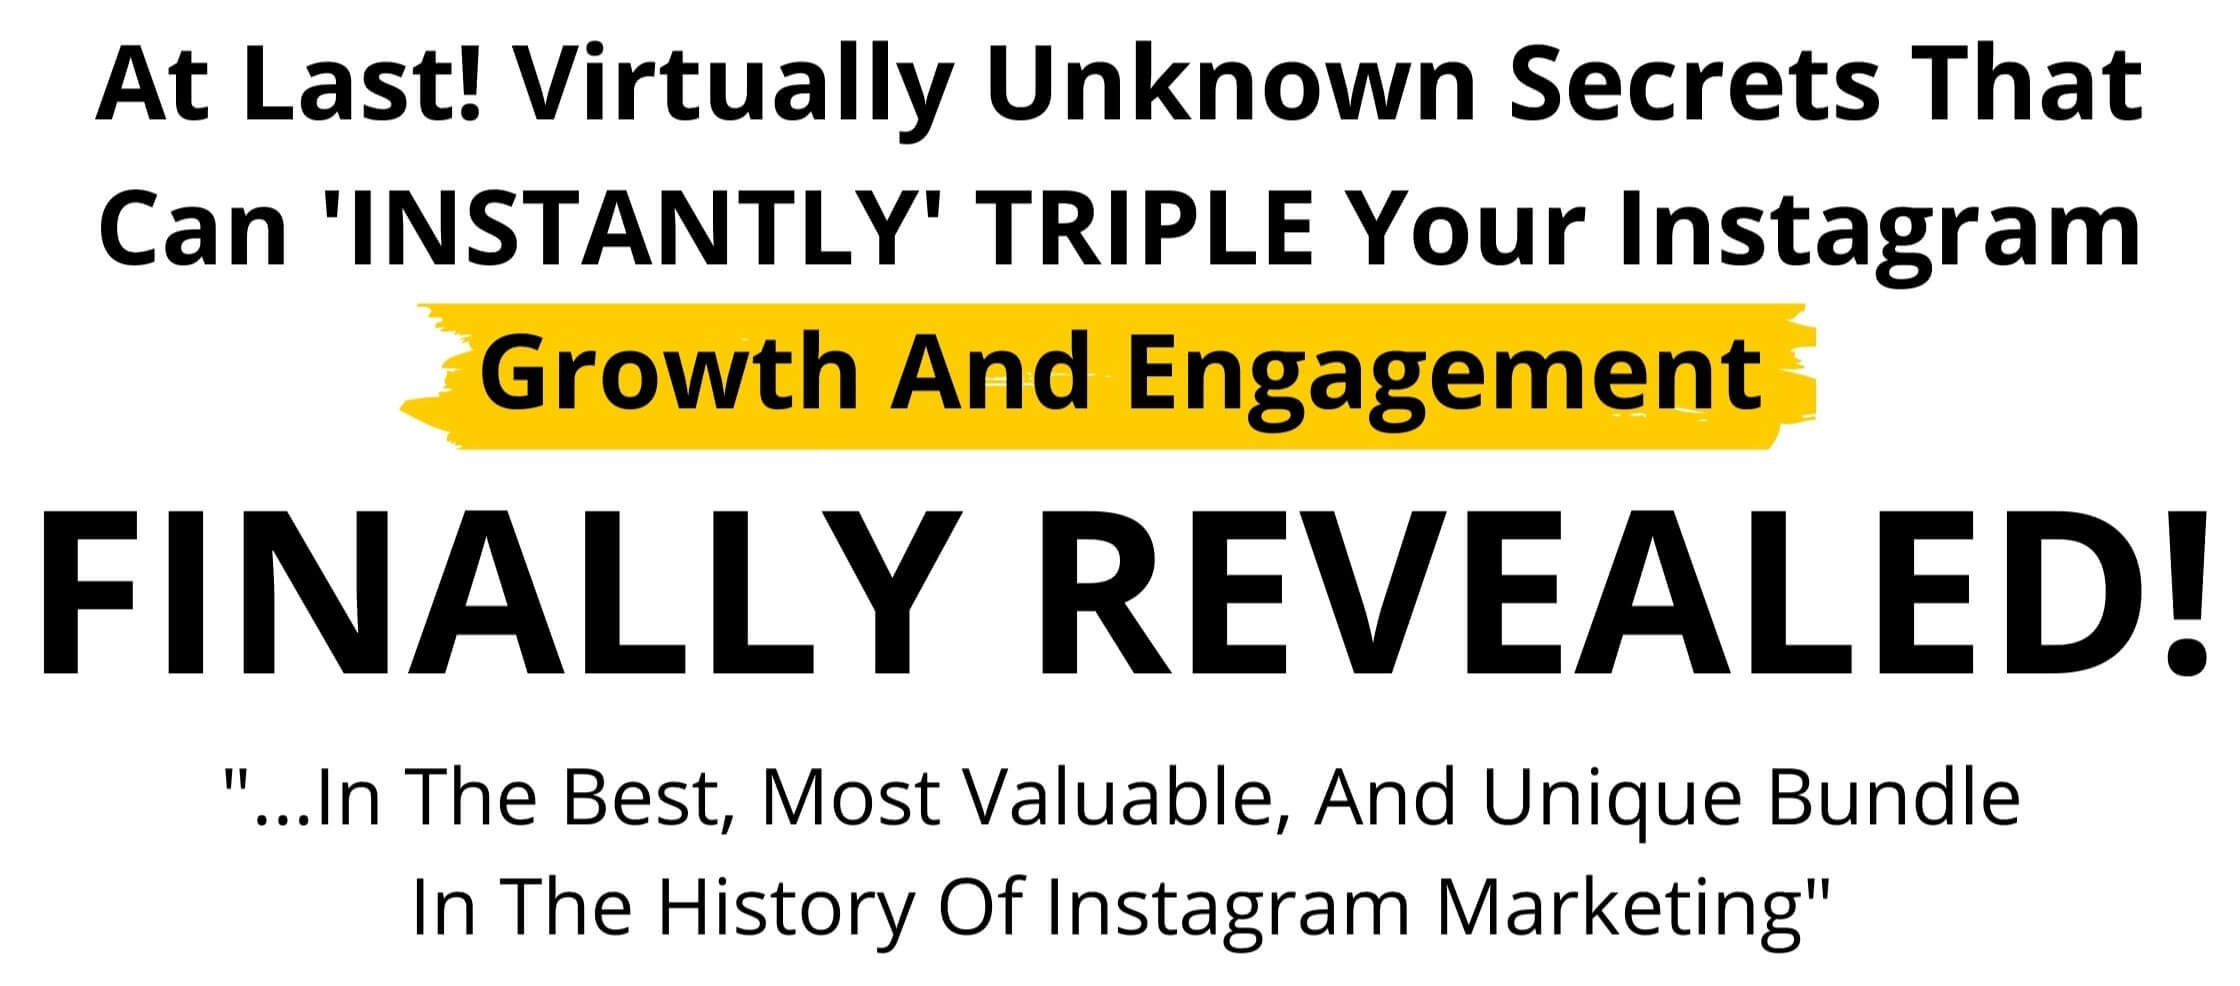 Headline for the instagram mastery page